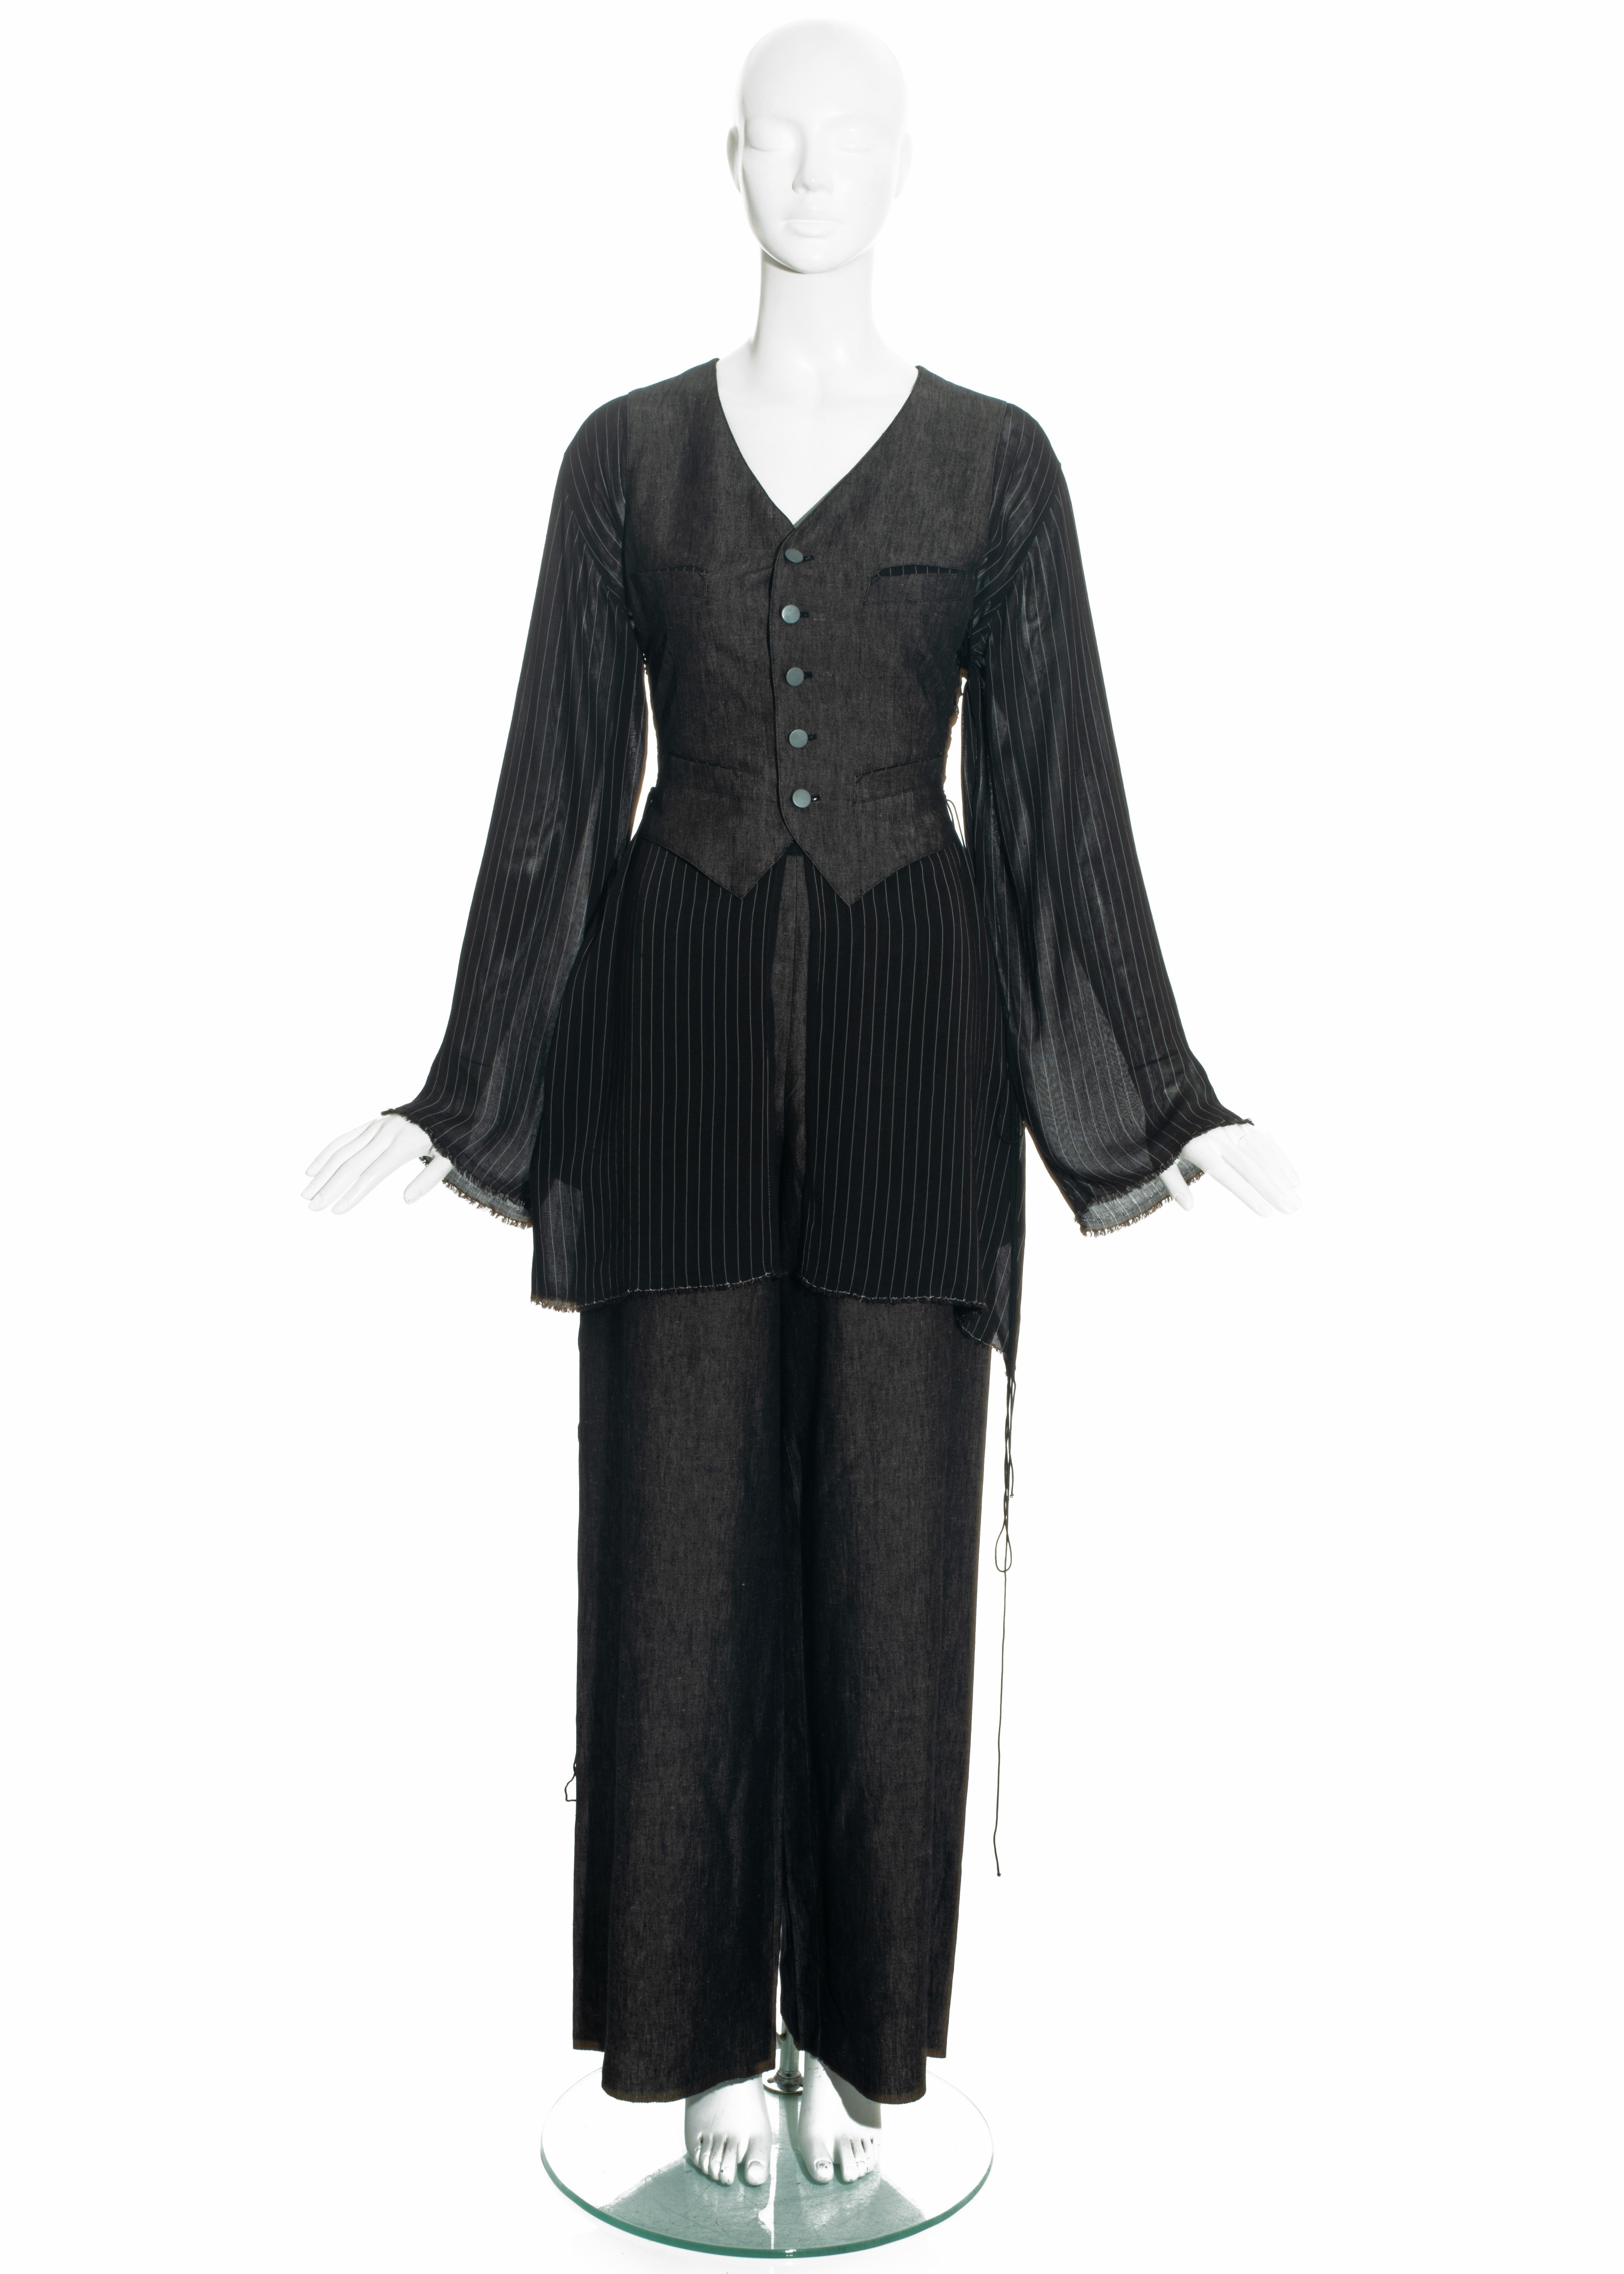 Jean Paul Gaultier pant suit comprising: grey linen waist coat with attached loose striped blouse, long lace-up fastenings on side seams, and silver metal buttons: matching grey linen wide leg pants. 

Spring-Summer 1994